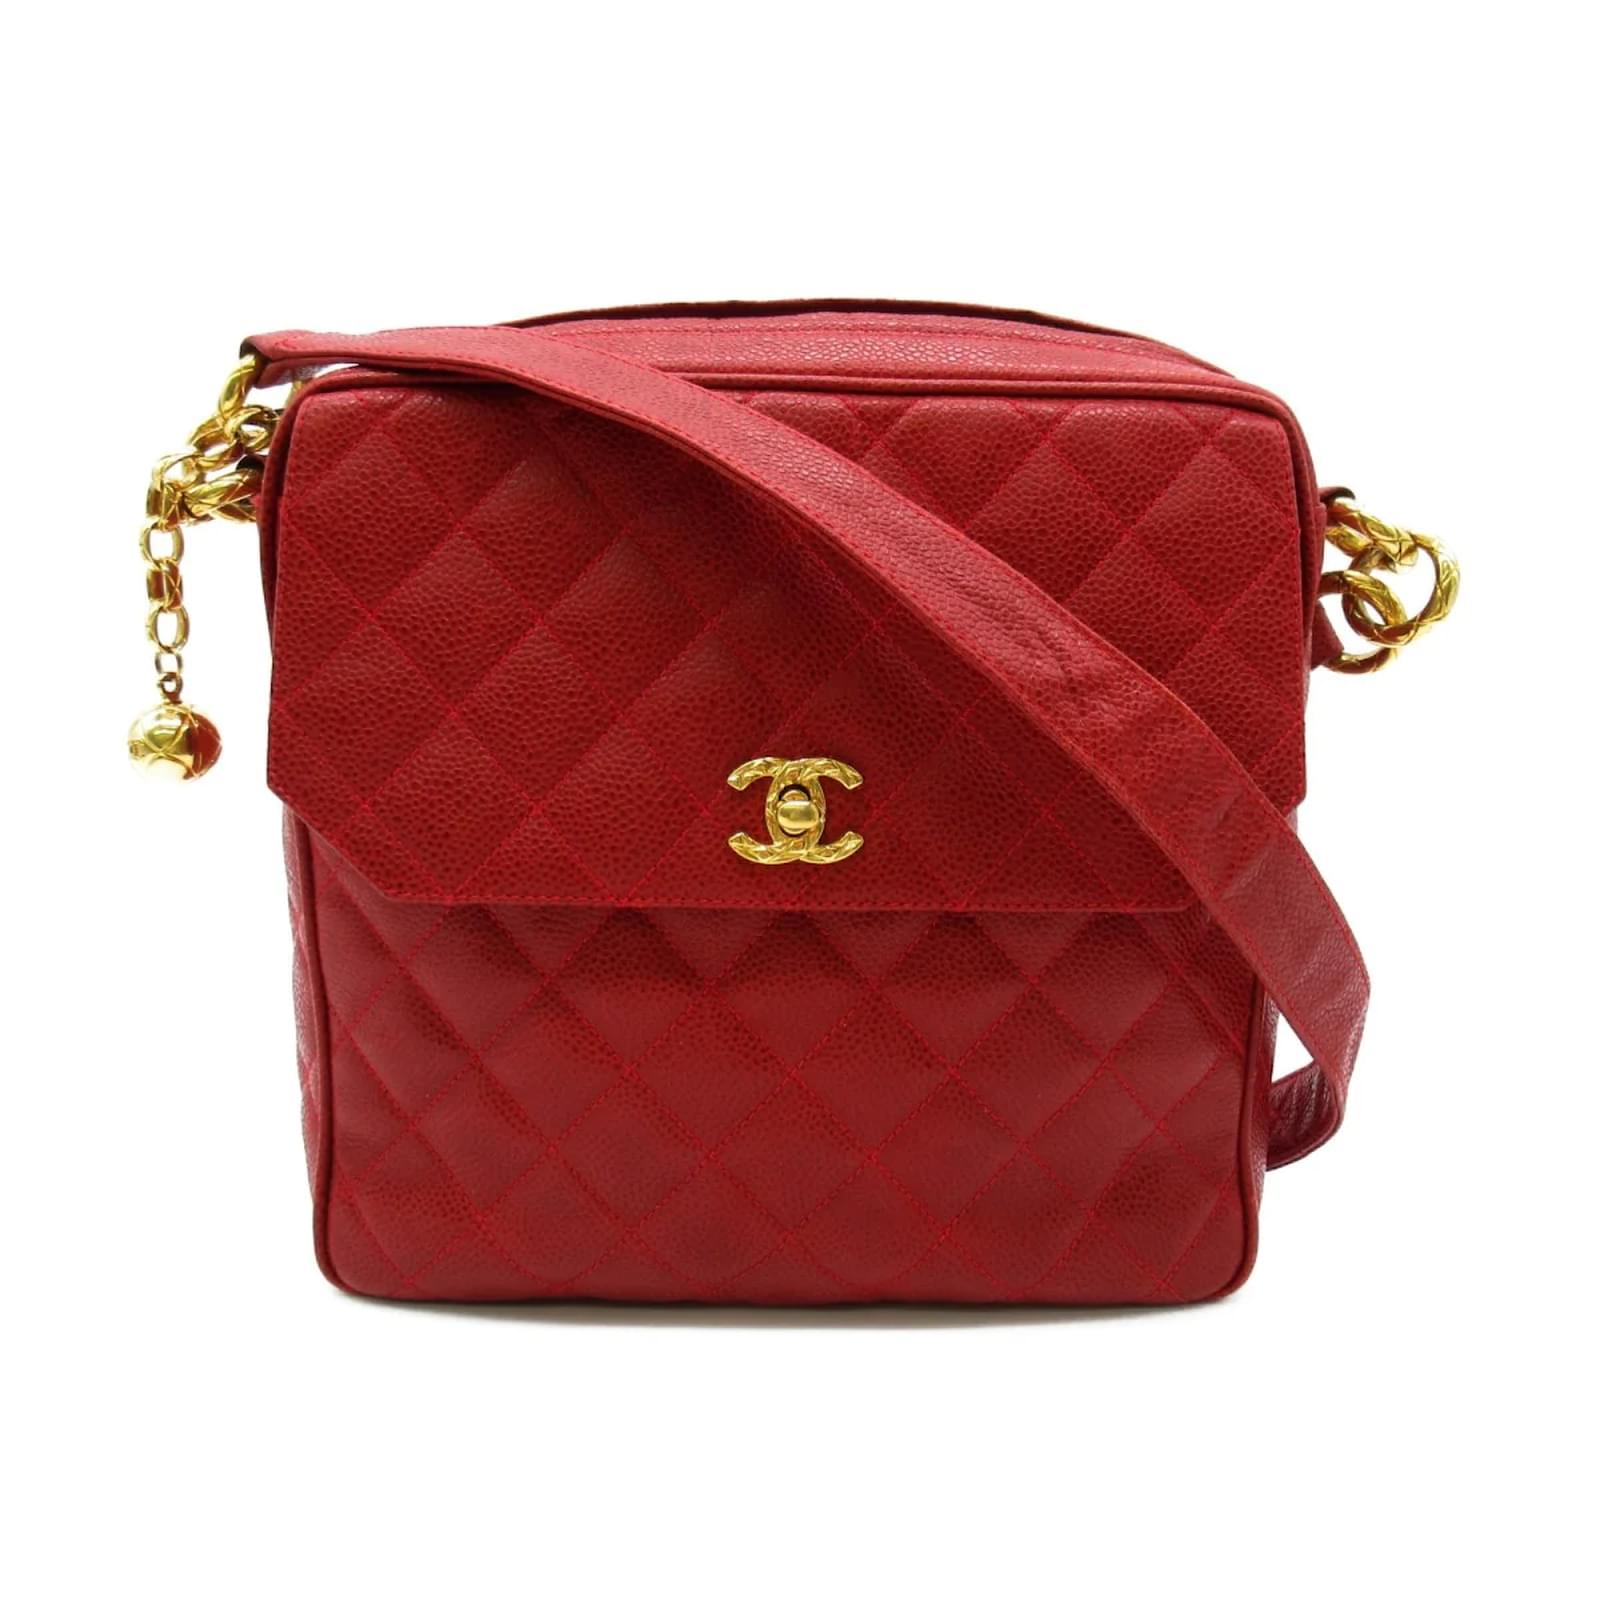 CHANEL Small Messenger Bags for Women, Authenticity Guaranteed